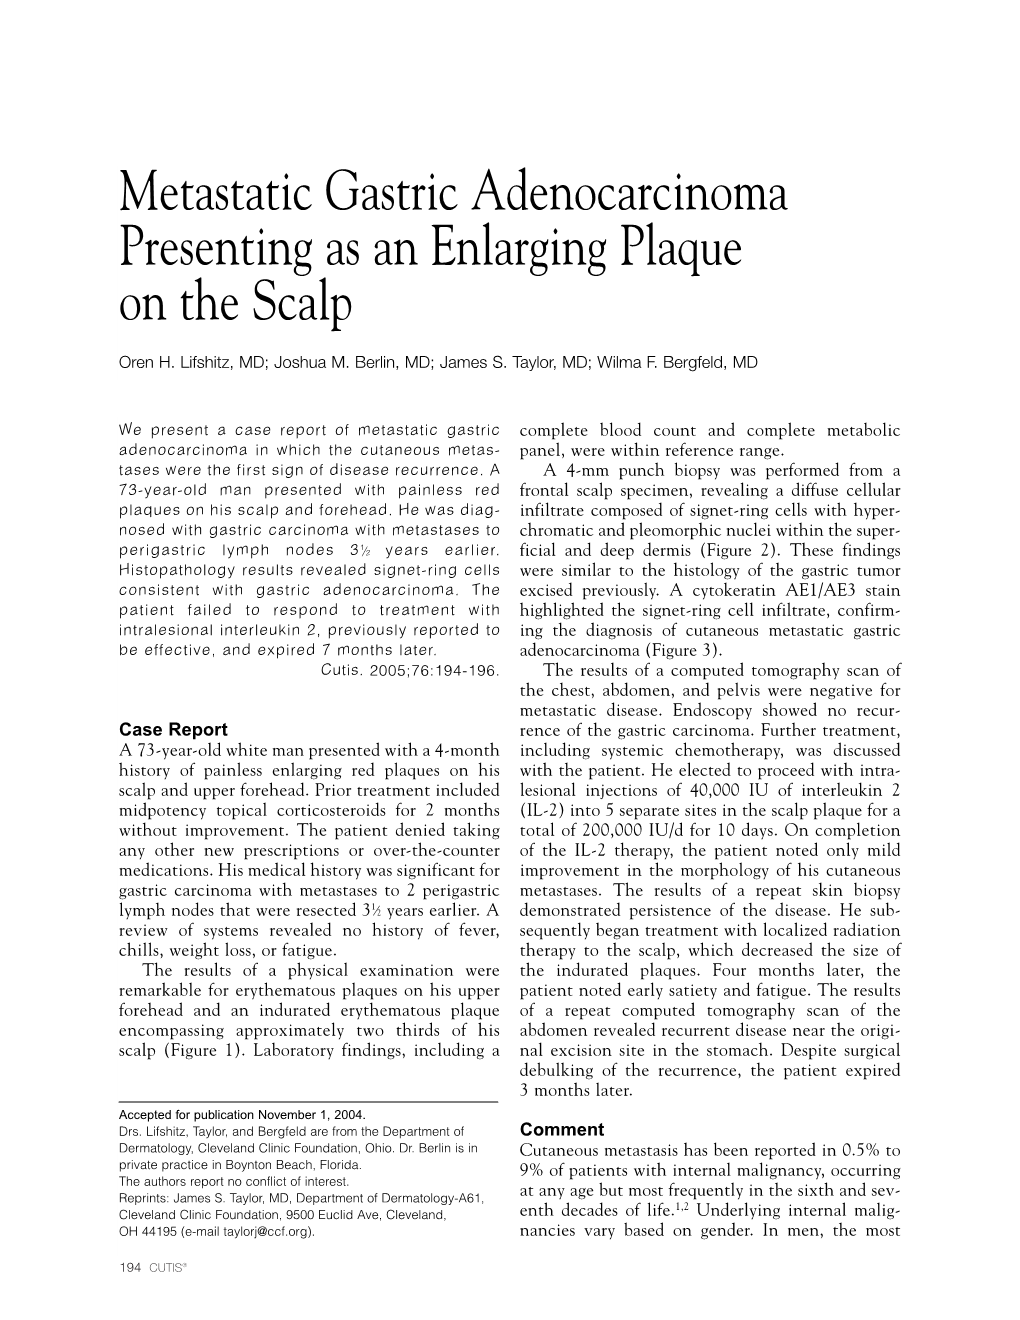 Metastatic Gastric Adenocarcinoma Presenting As an Enlarging Plaque on the Scalp